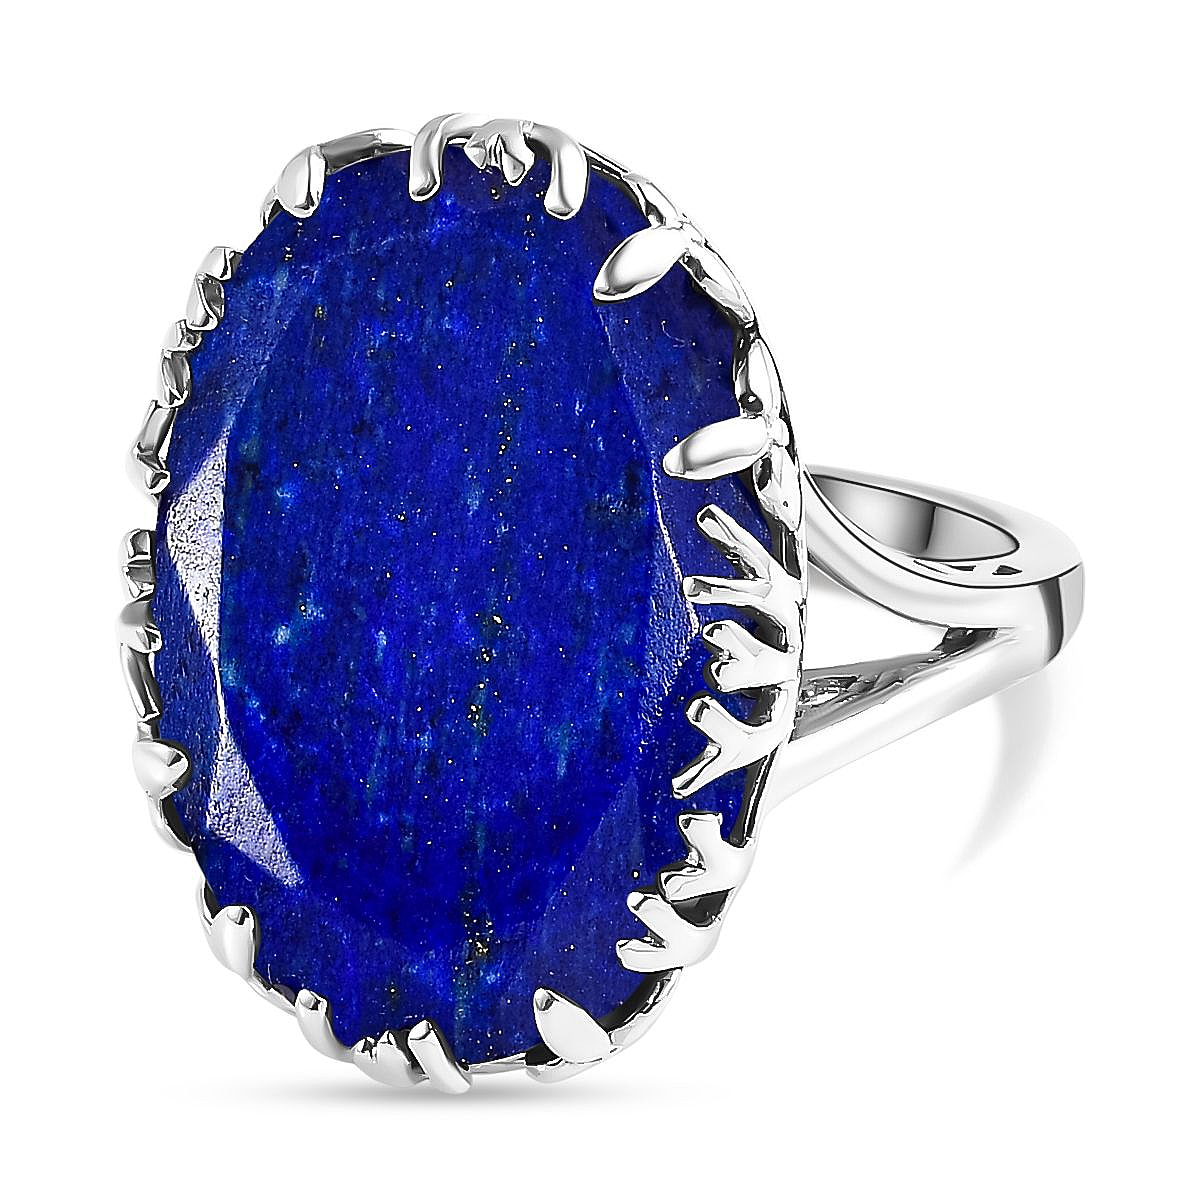 Lapis Lazuli Solitaire Ring in Platinum Overlay Sterling Silver 26.21 Ct, Silver Wt. 6.29 Gms